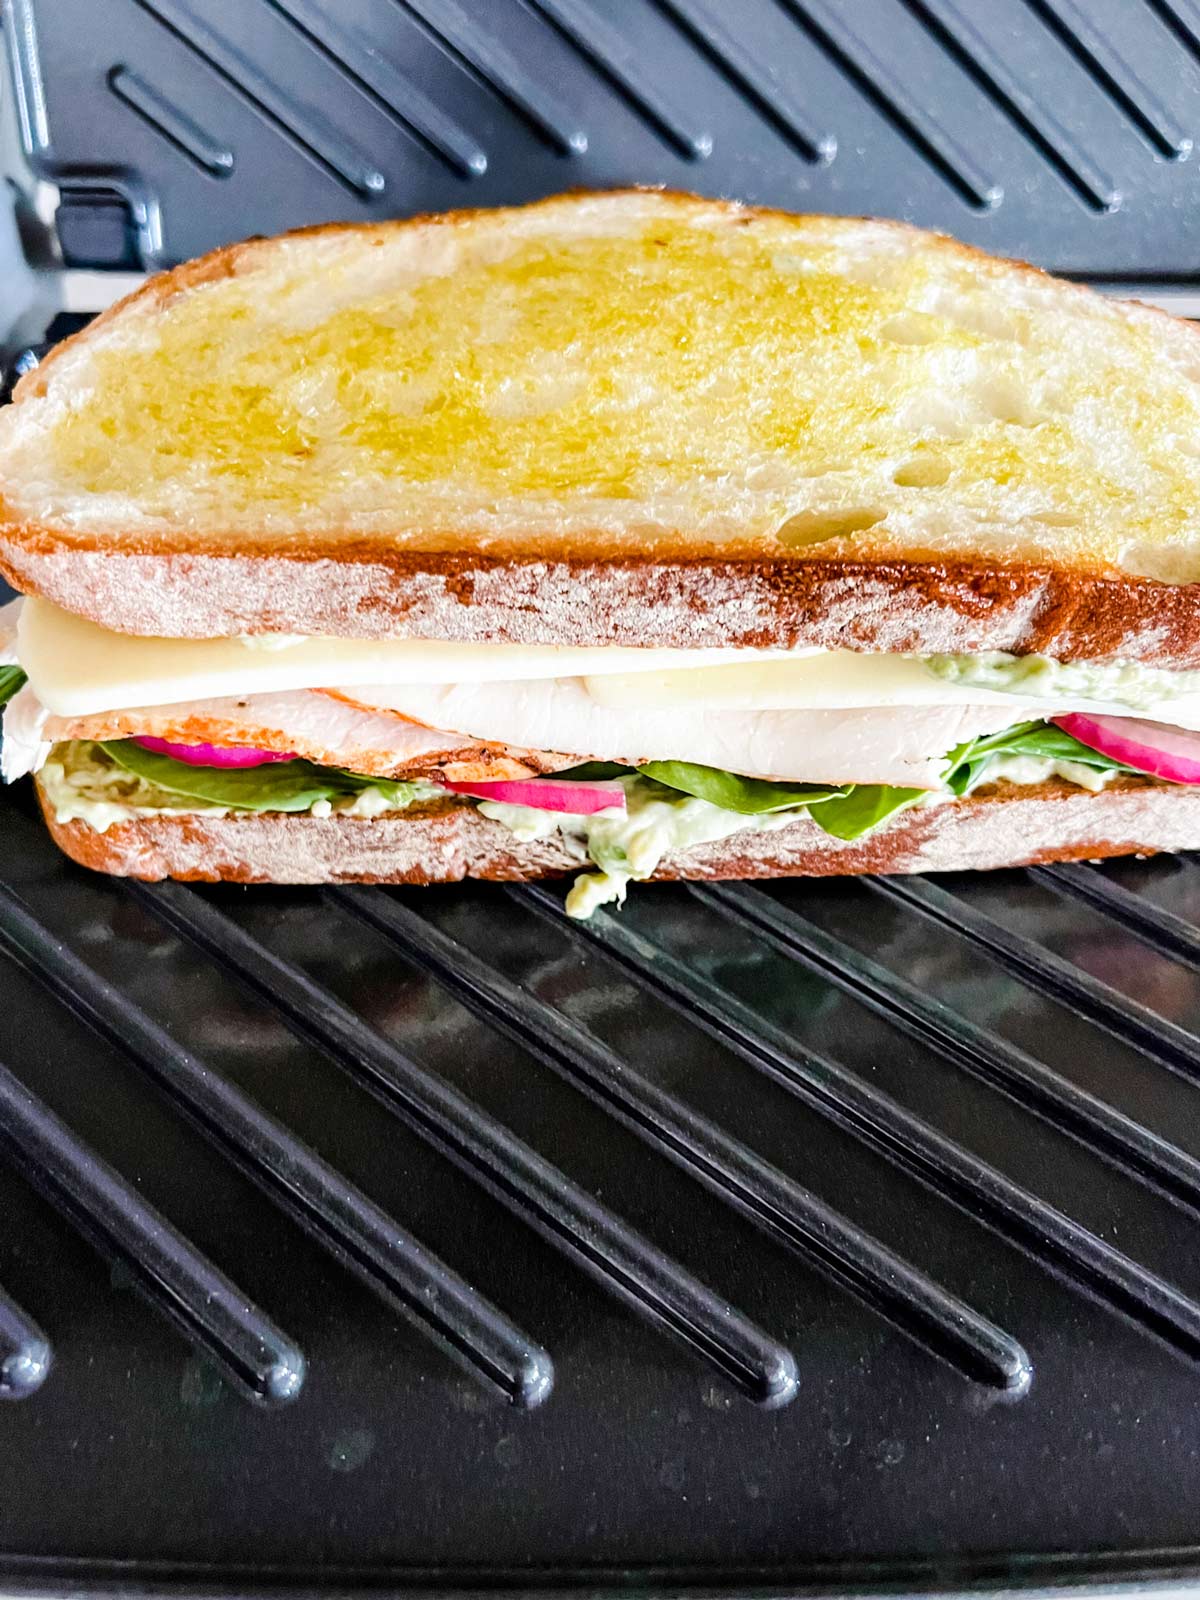 A turkey avocado panini that has just been added to a panini press.